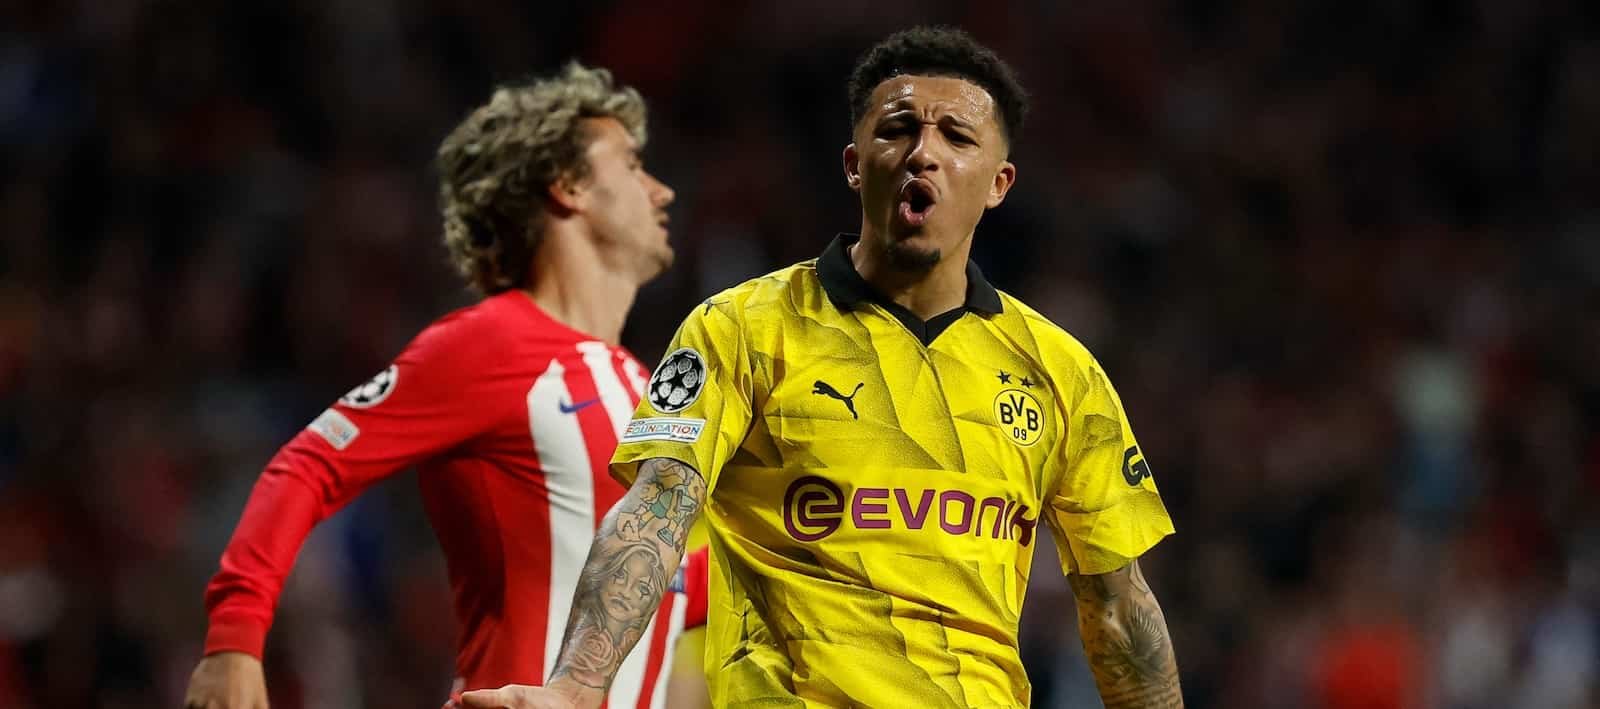 Jadon Sancho may prevent Manchester United from qualifying for the Champions League – Man United News And Transfer News